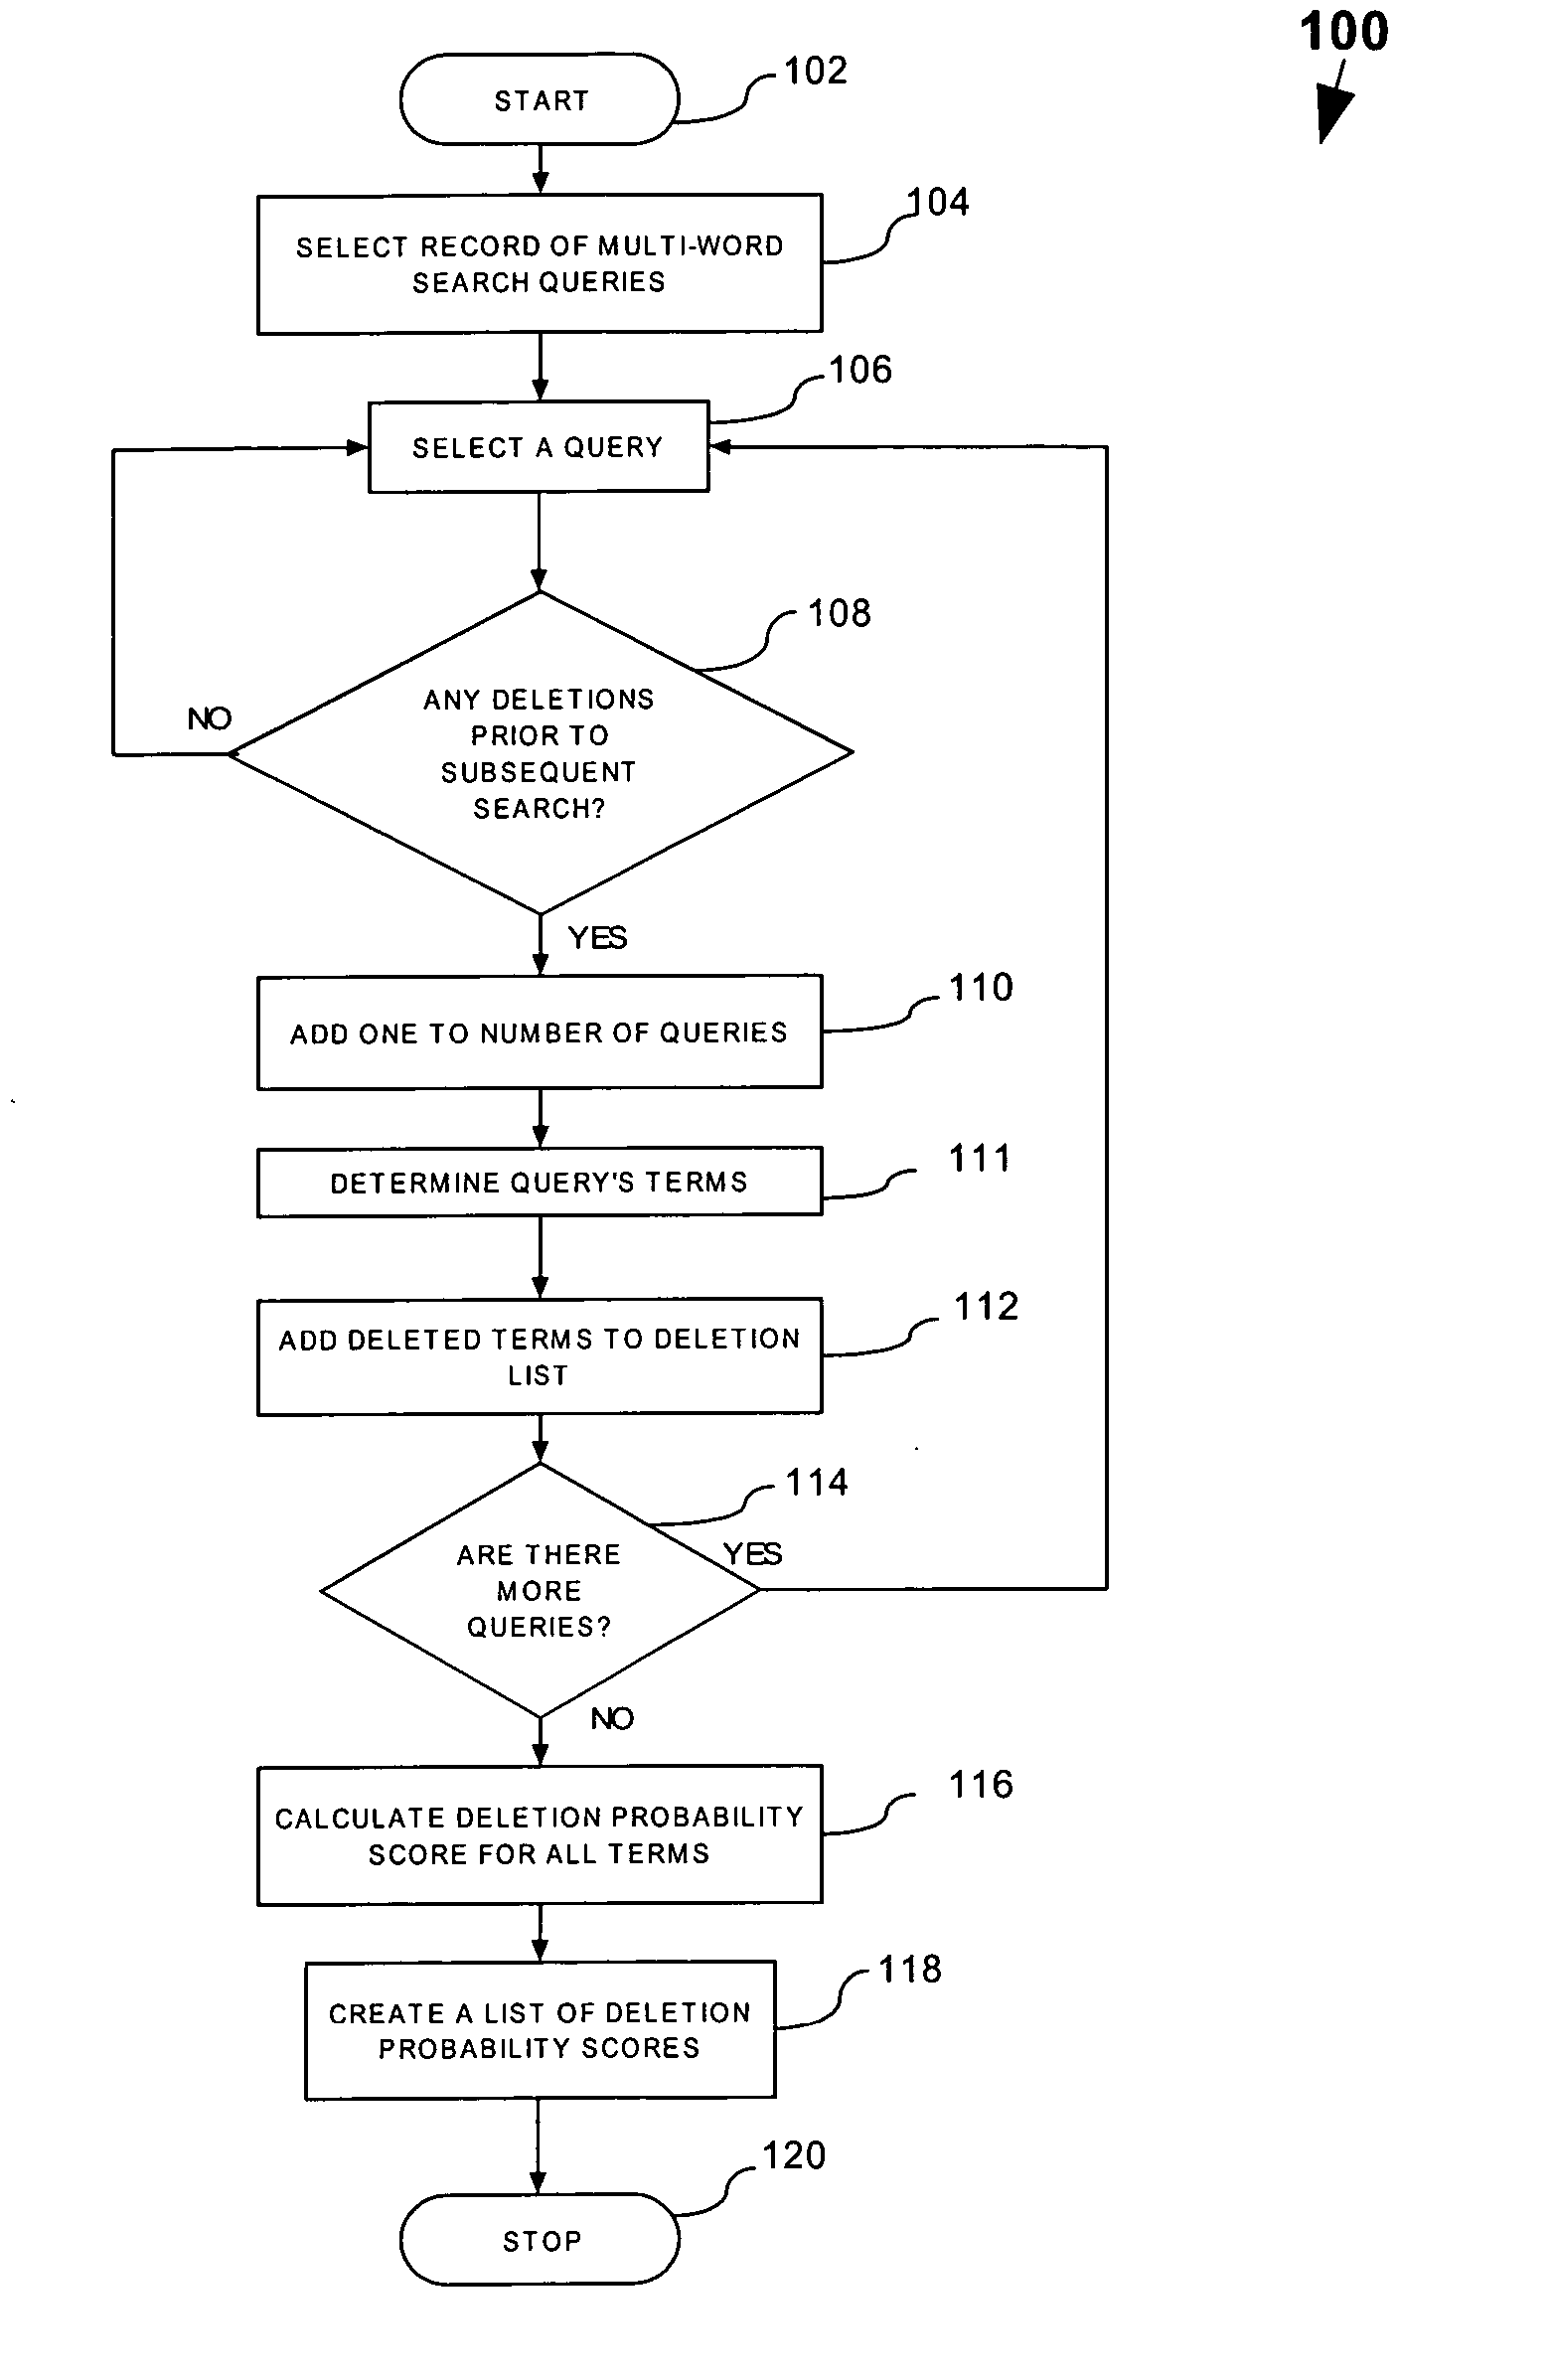 System and methods for ranking the relative value of terms in a multi-term search query using deletion prediction